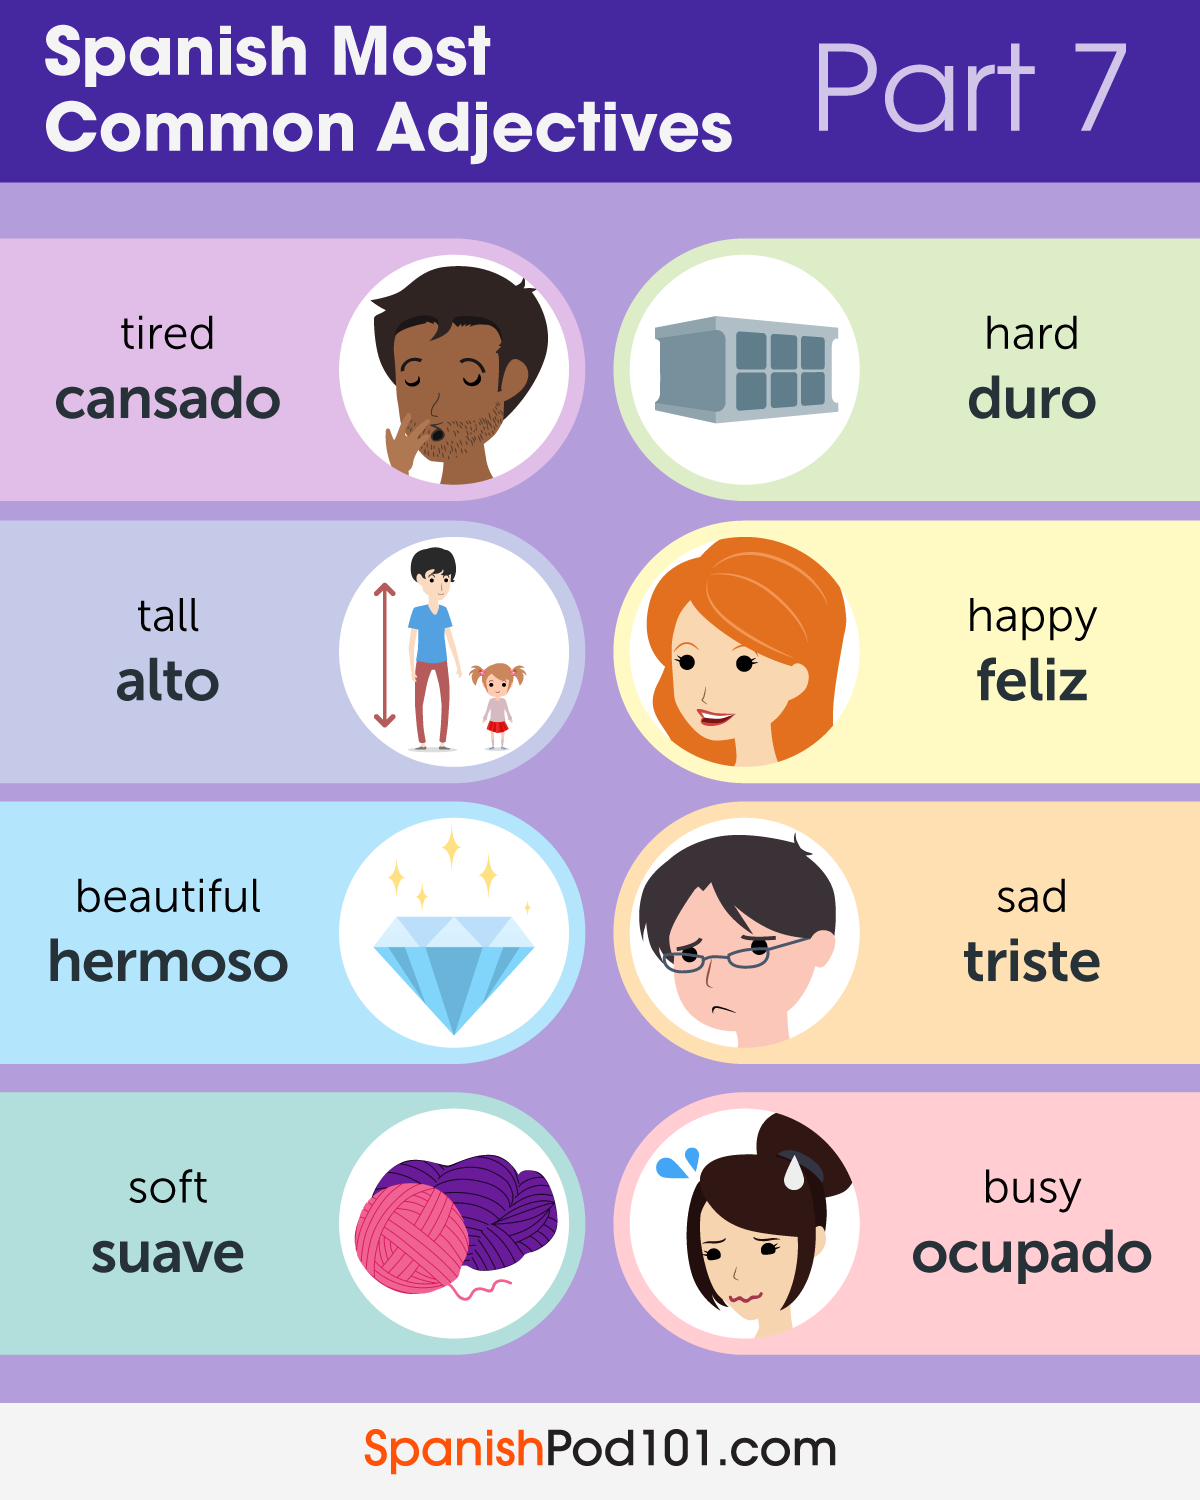 learn-spanish-spanishpod101-most-common-adjectives-in-spanish